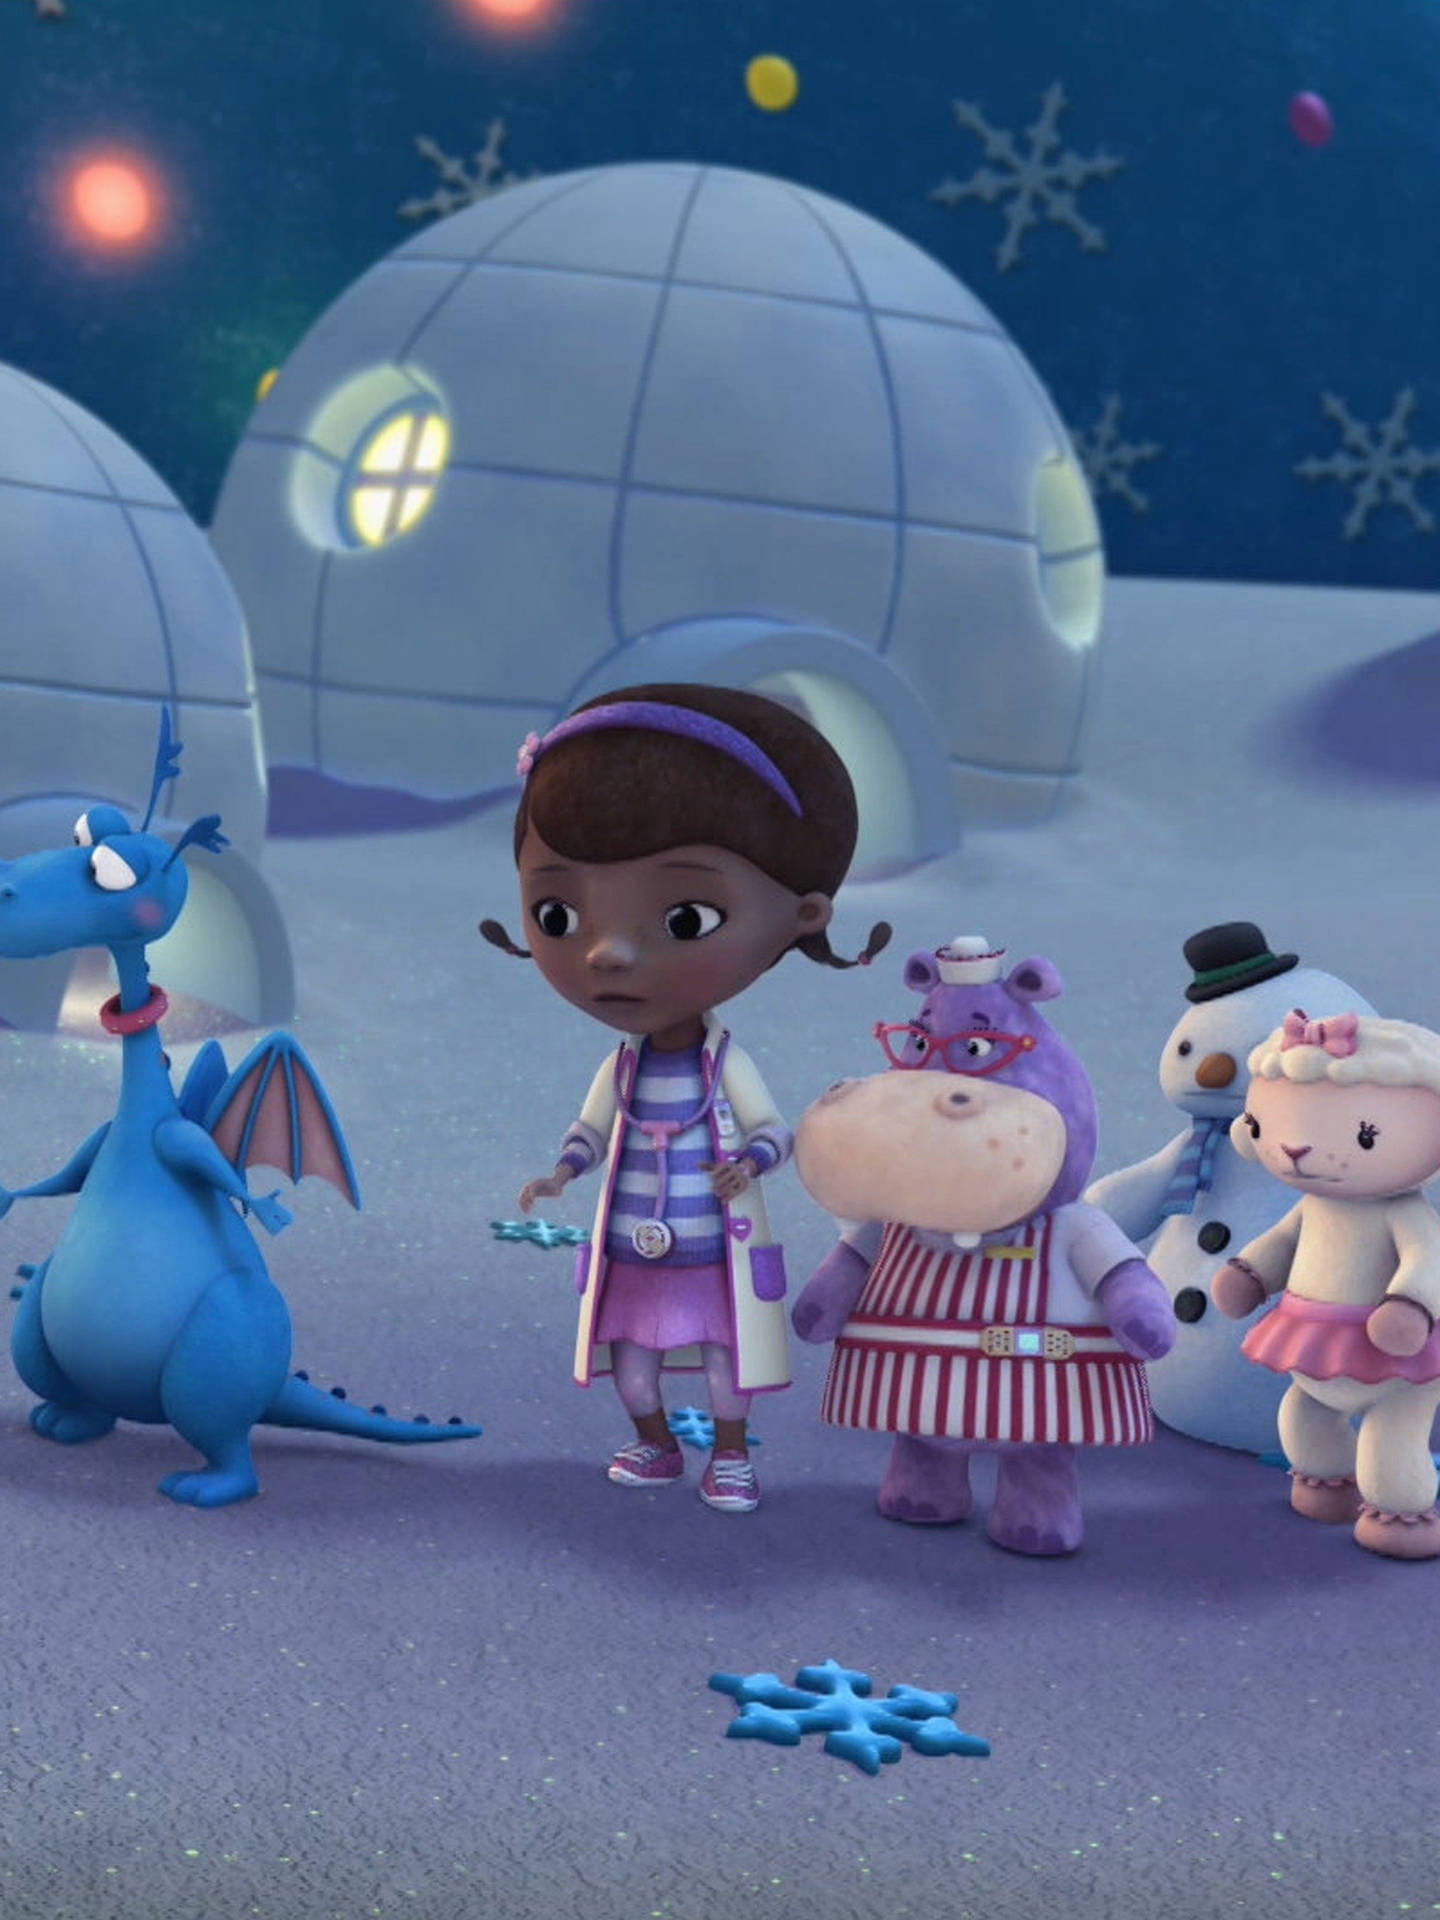 Playful Doc Mcstuffins With Chilly Background